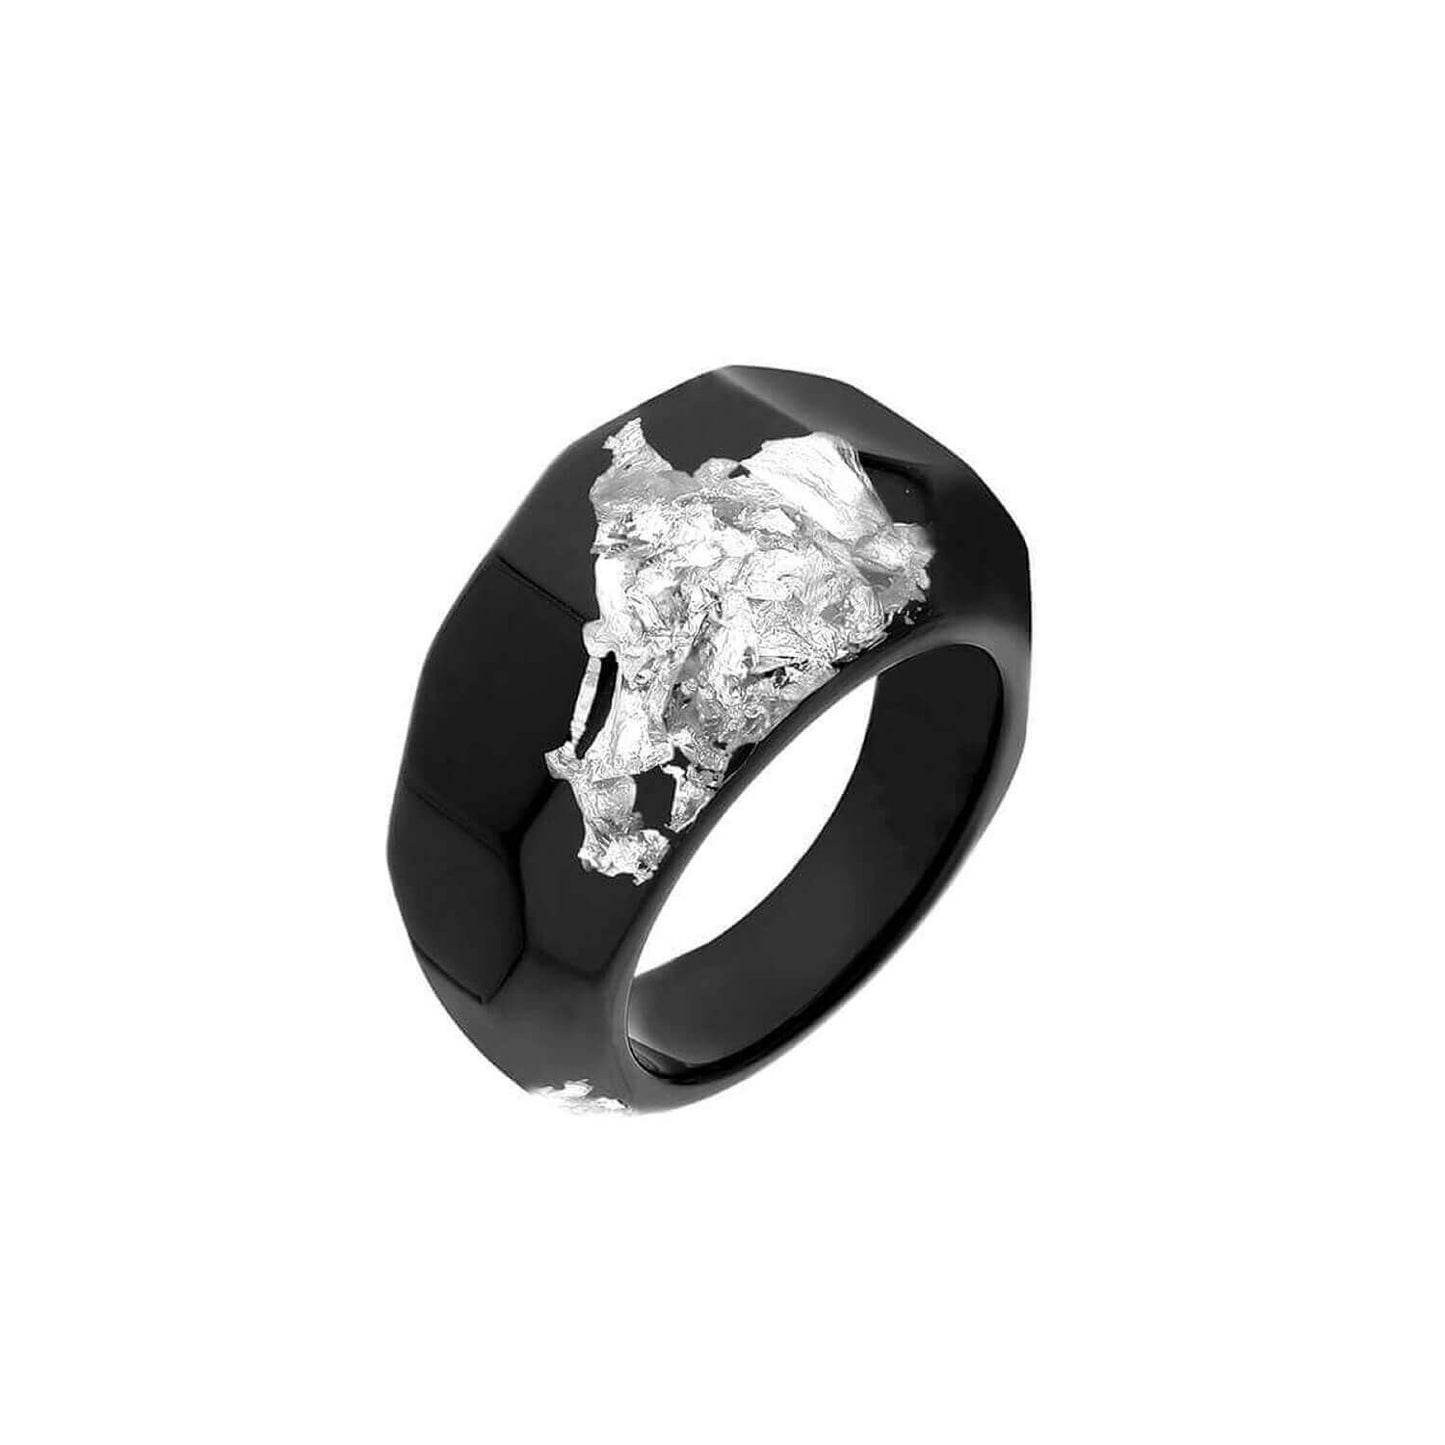 Black Lucite Ring with Silver Leaf